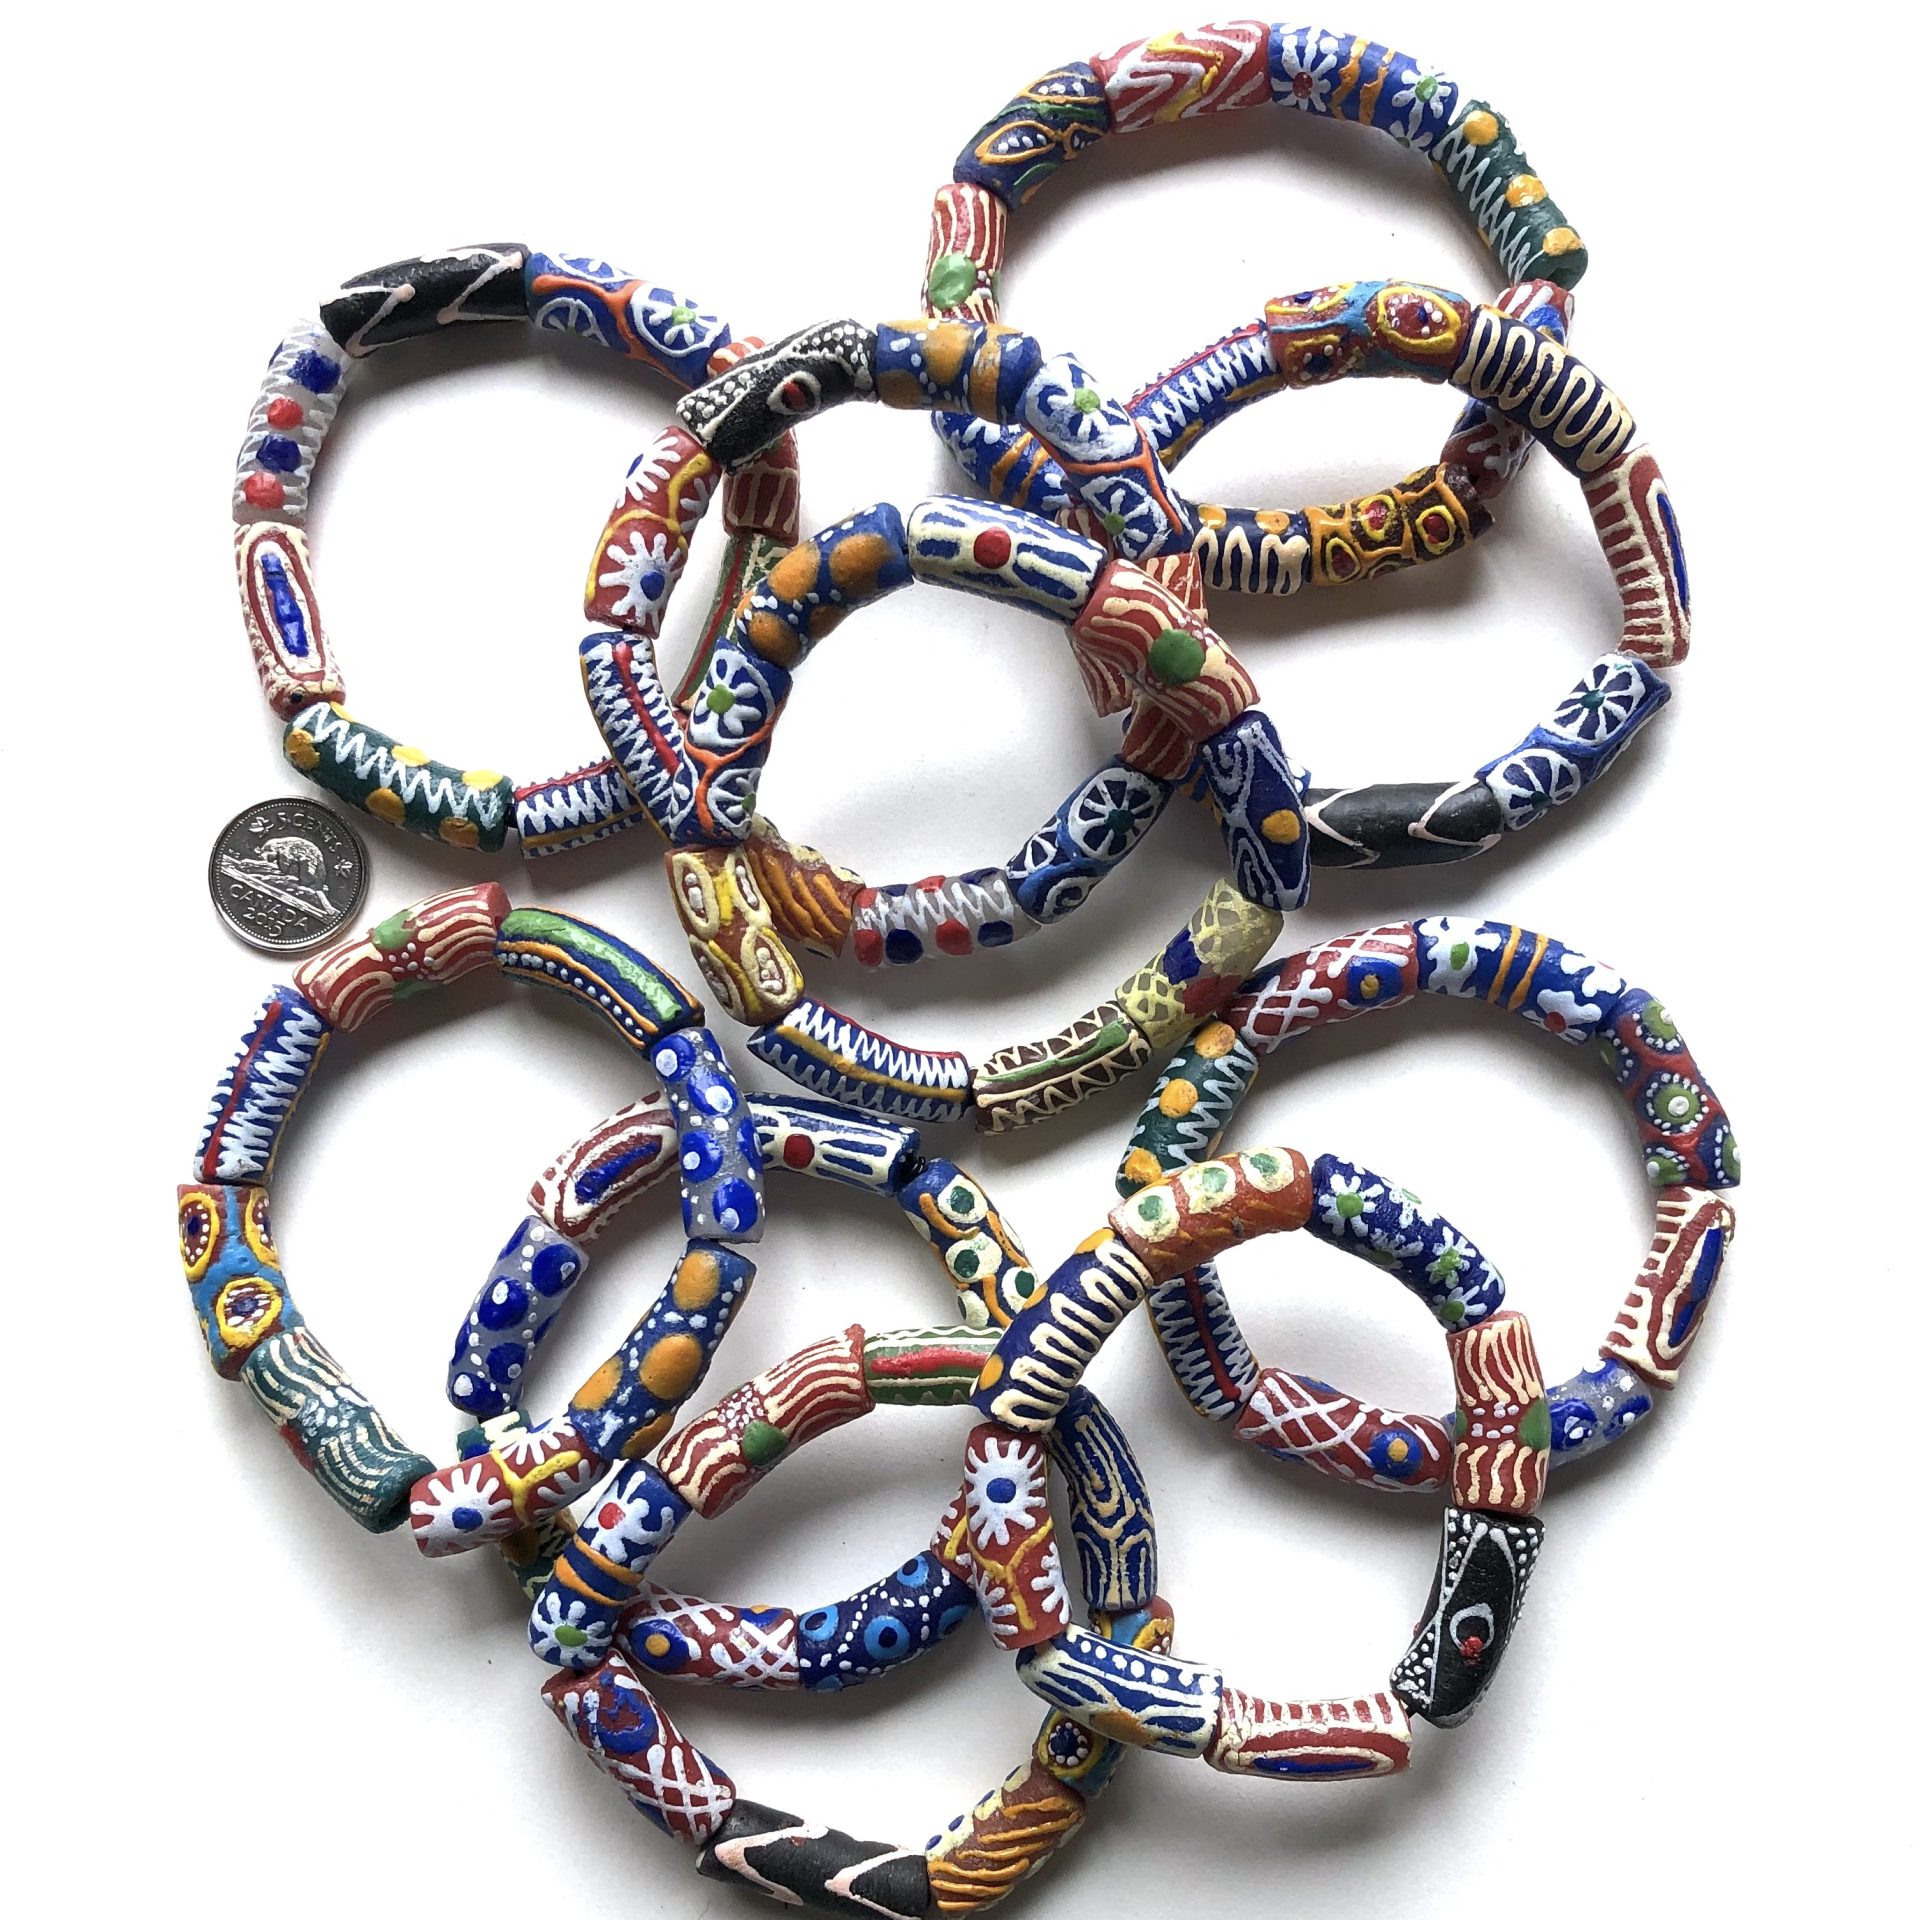 Handpainted Recycled Glass Beads Bracelet